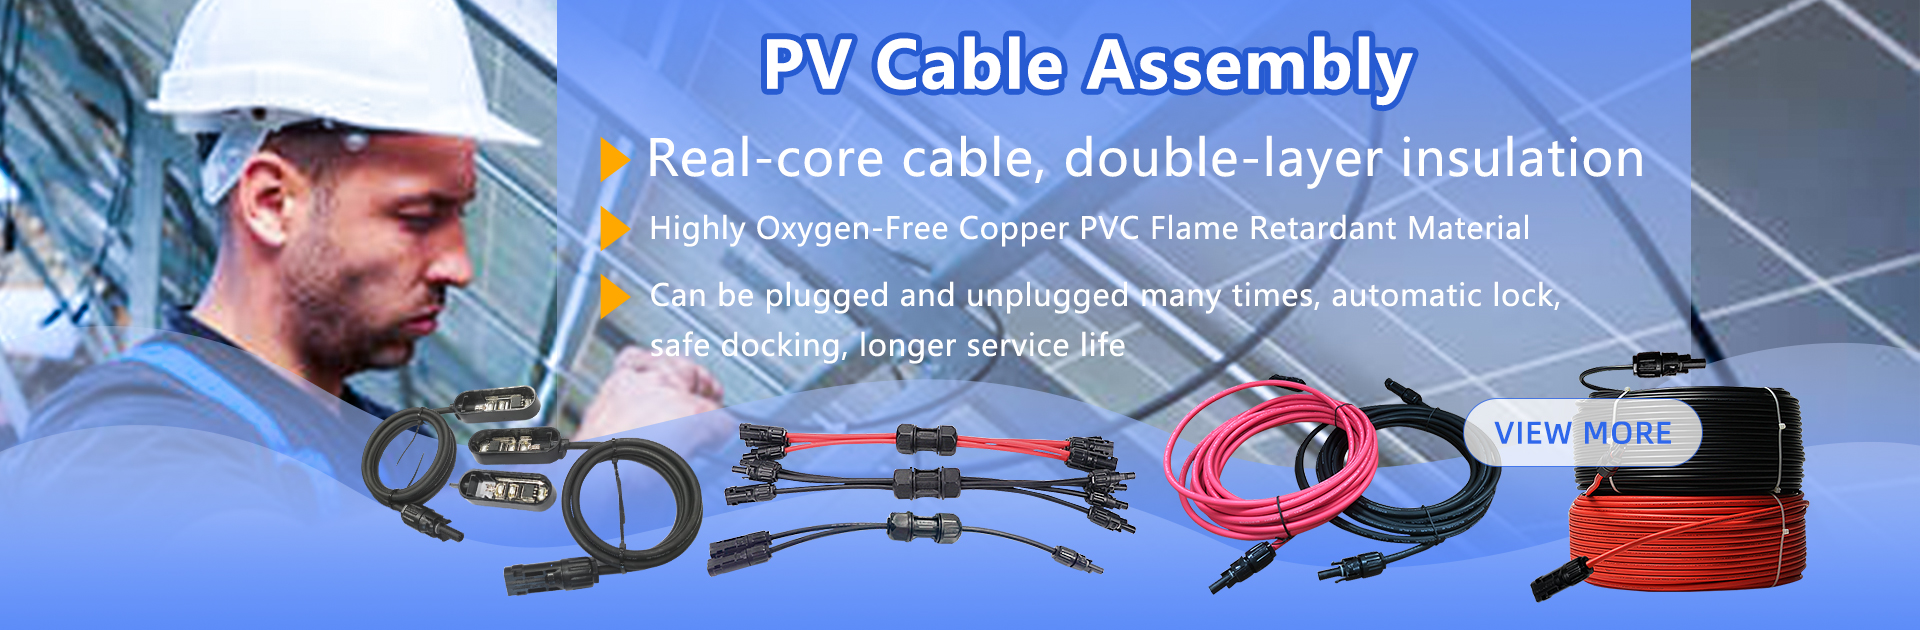 pv cable assembly